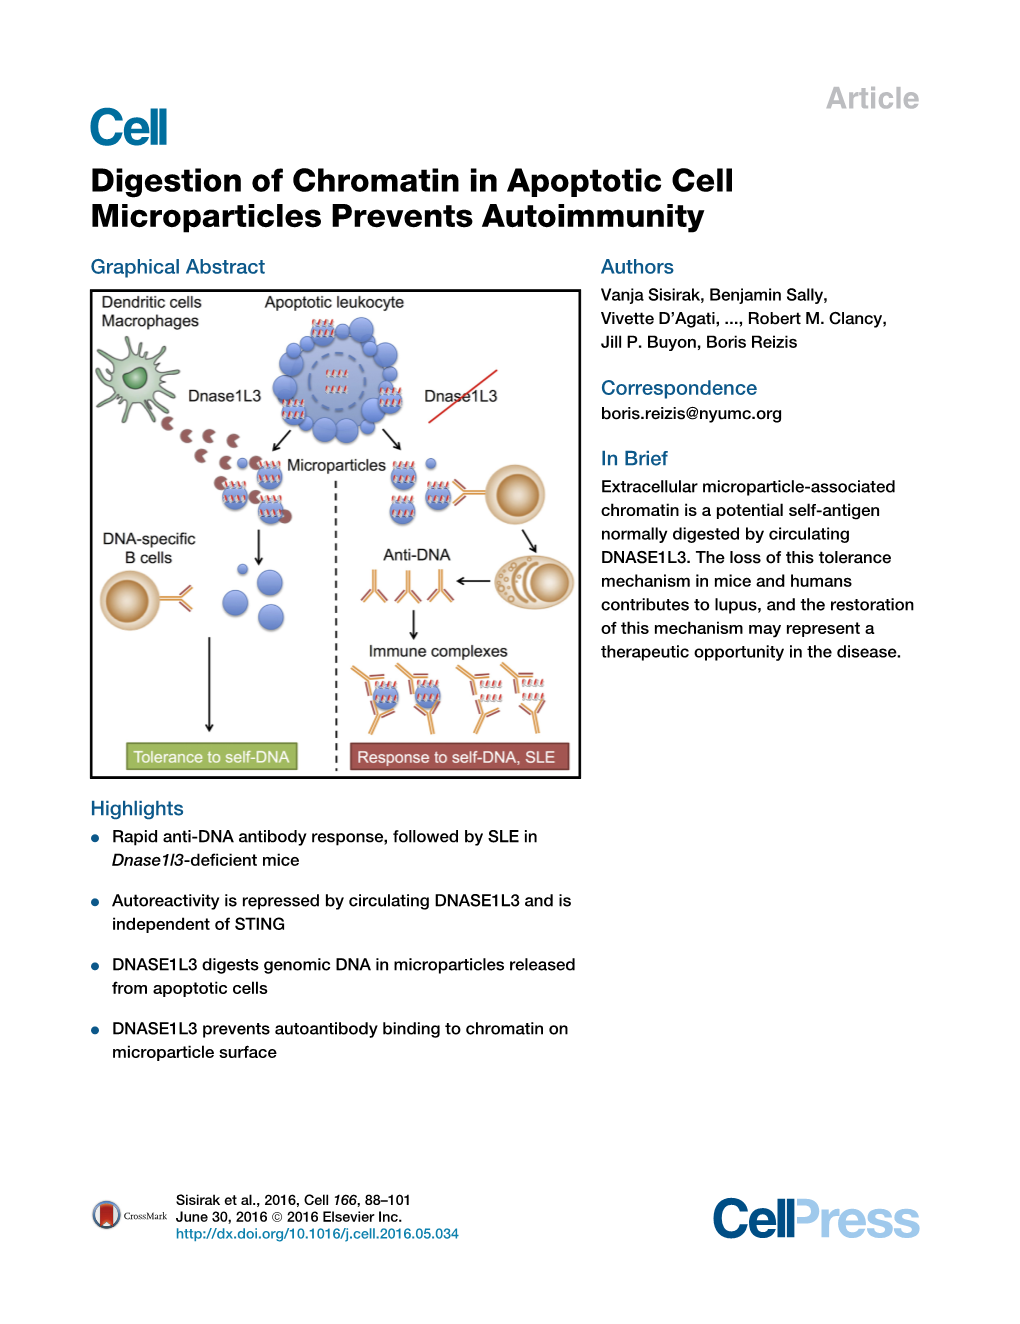 Digestion of Chromatin in Apoptotic Cell Microparticles Prevents Autoimmunity